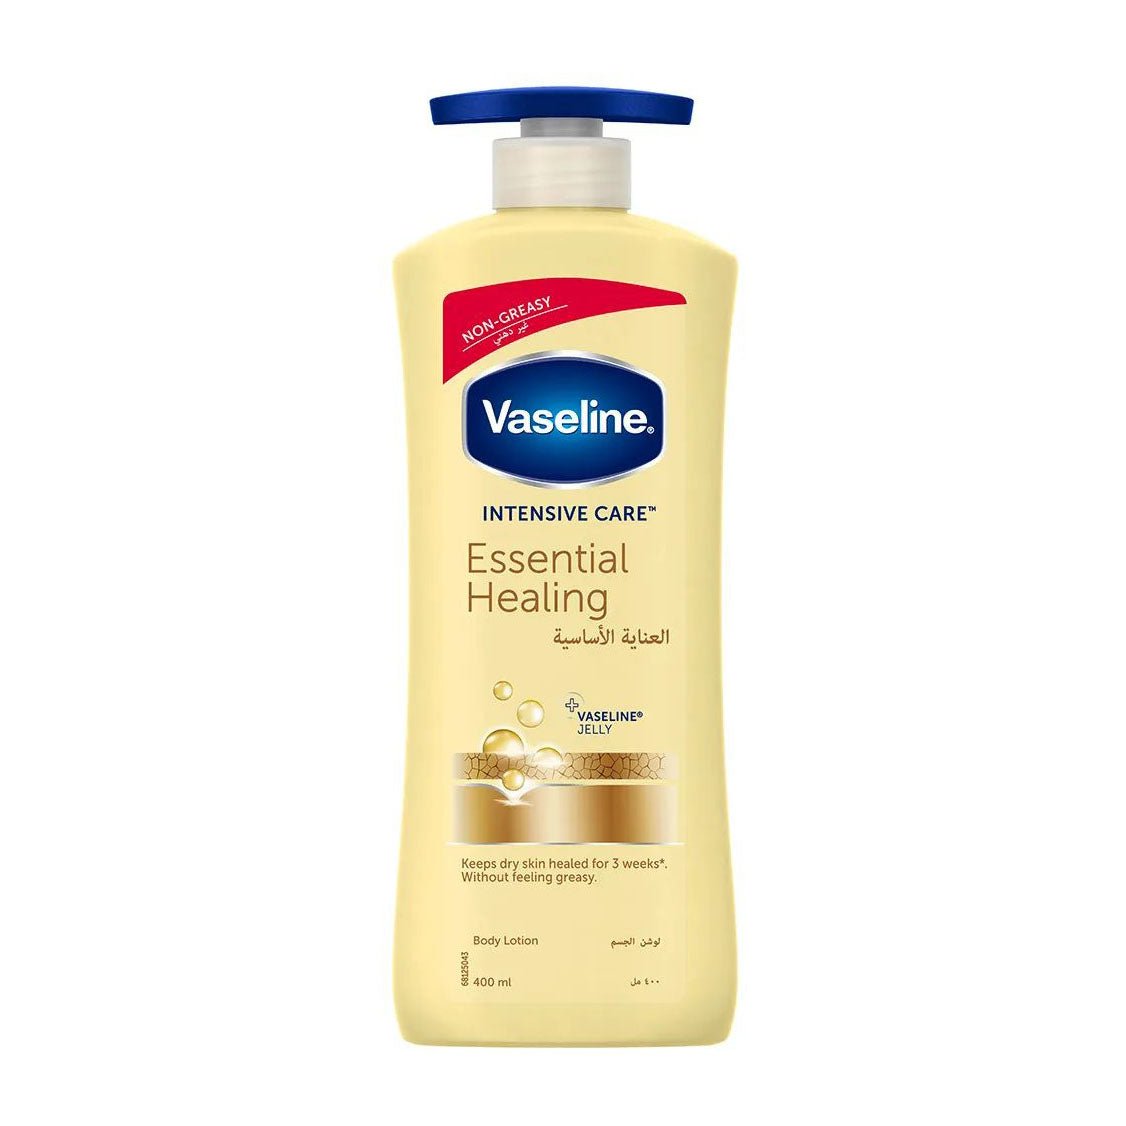 Vaseline Intensive Care Essential Healing Body Lotion ( Offer 15% ) – 400ml - Bloom Pharmacy